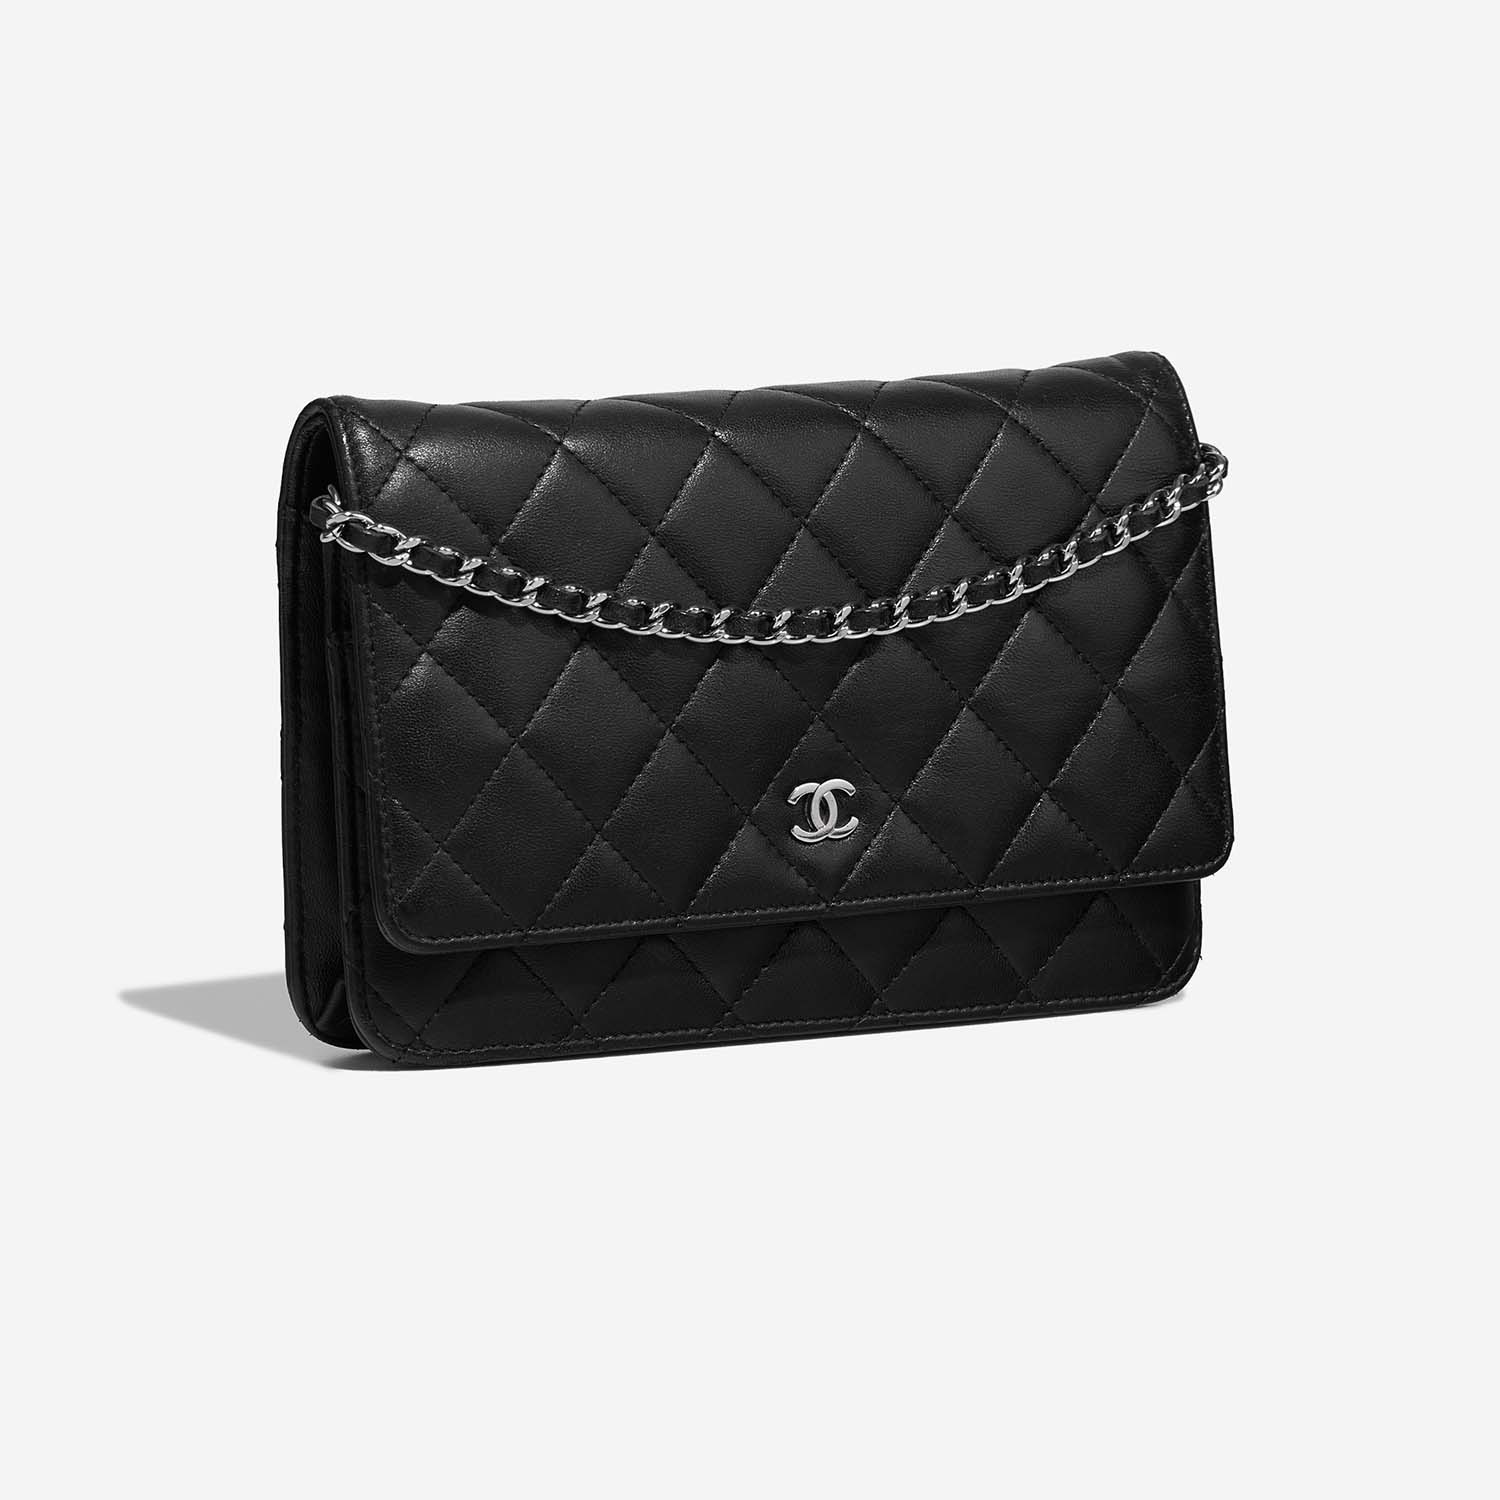 Chanel - Authenticated Wallet on Chain Timeless/Classique Handbag - Leather Black Plain for Women, Very Good Condition